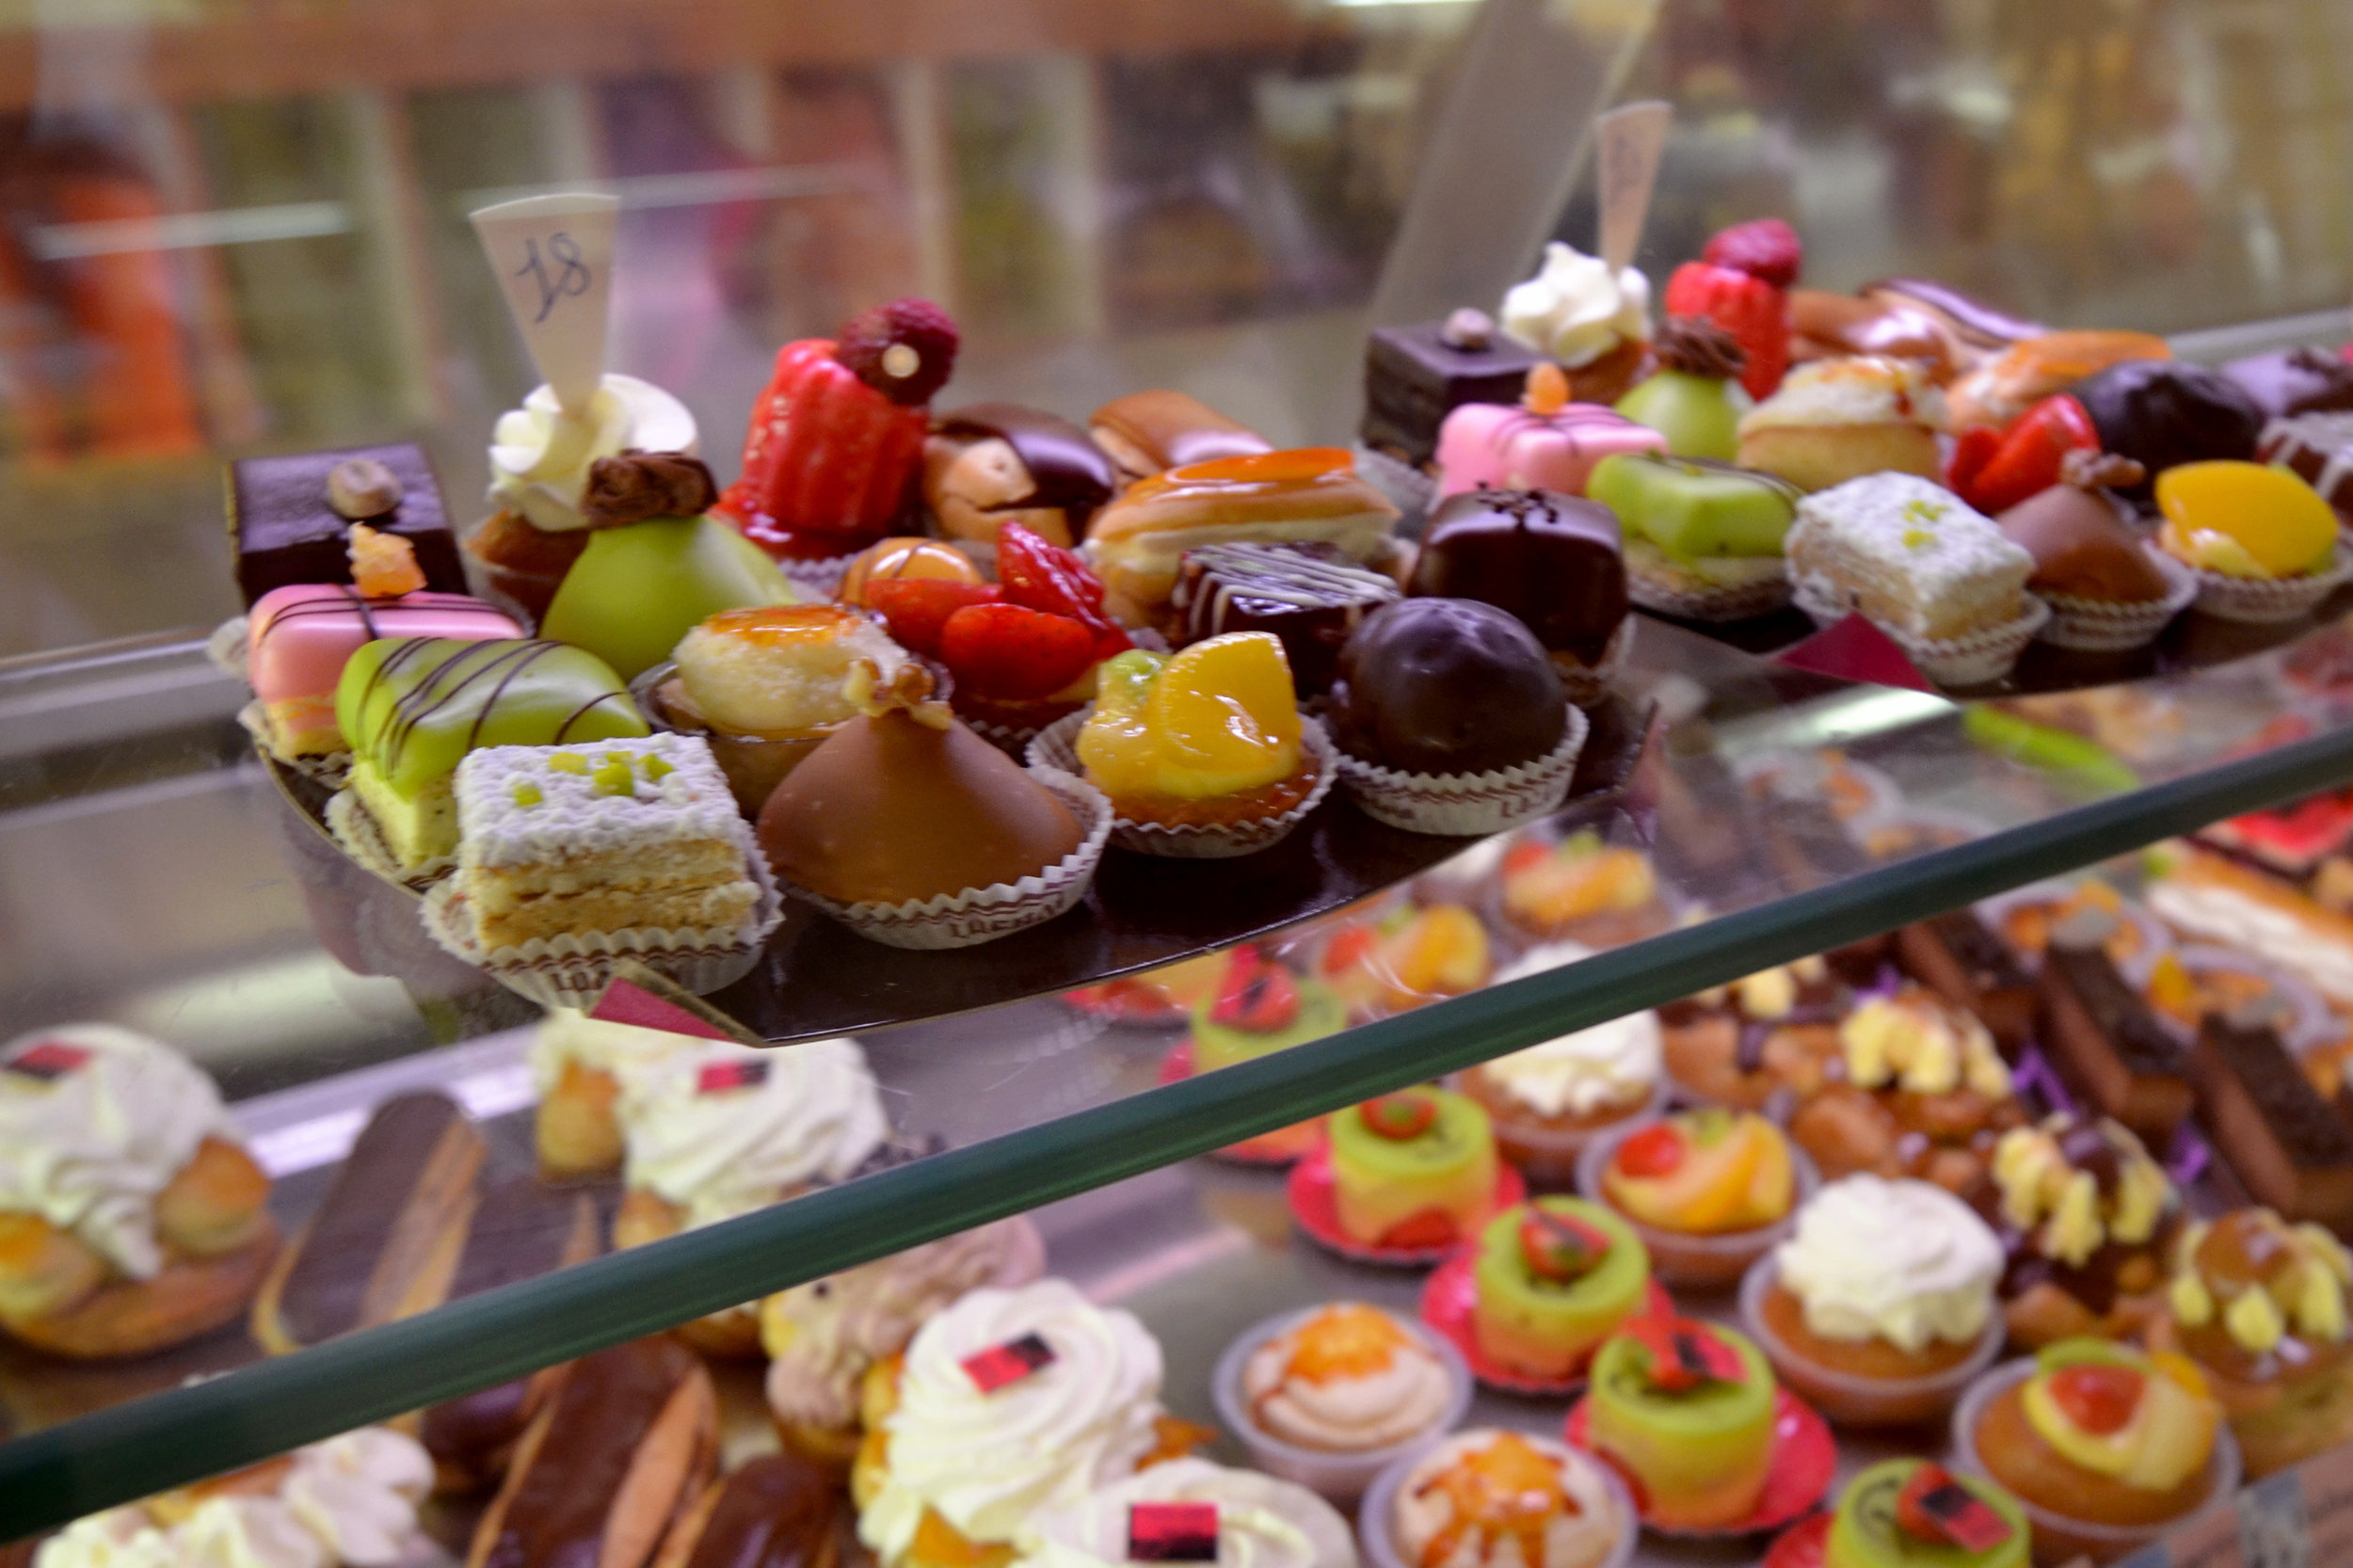 amazing cakes, pastries and sweets